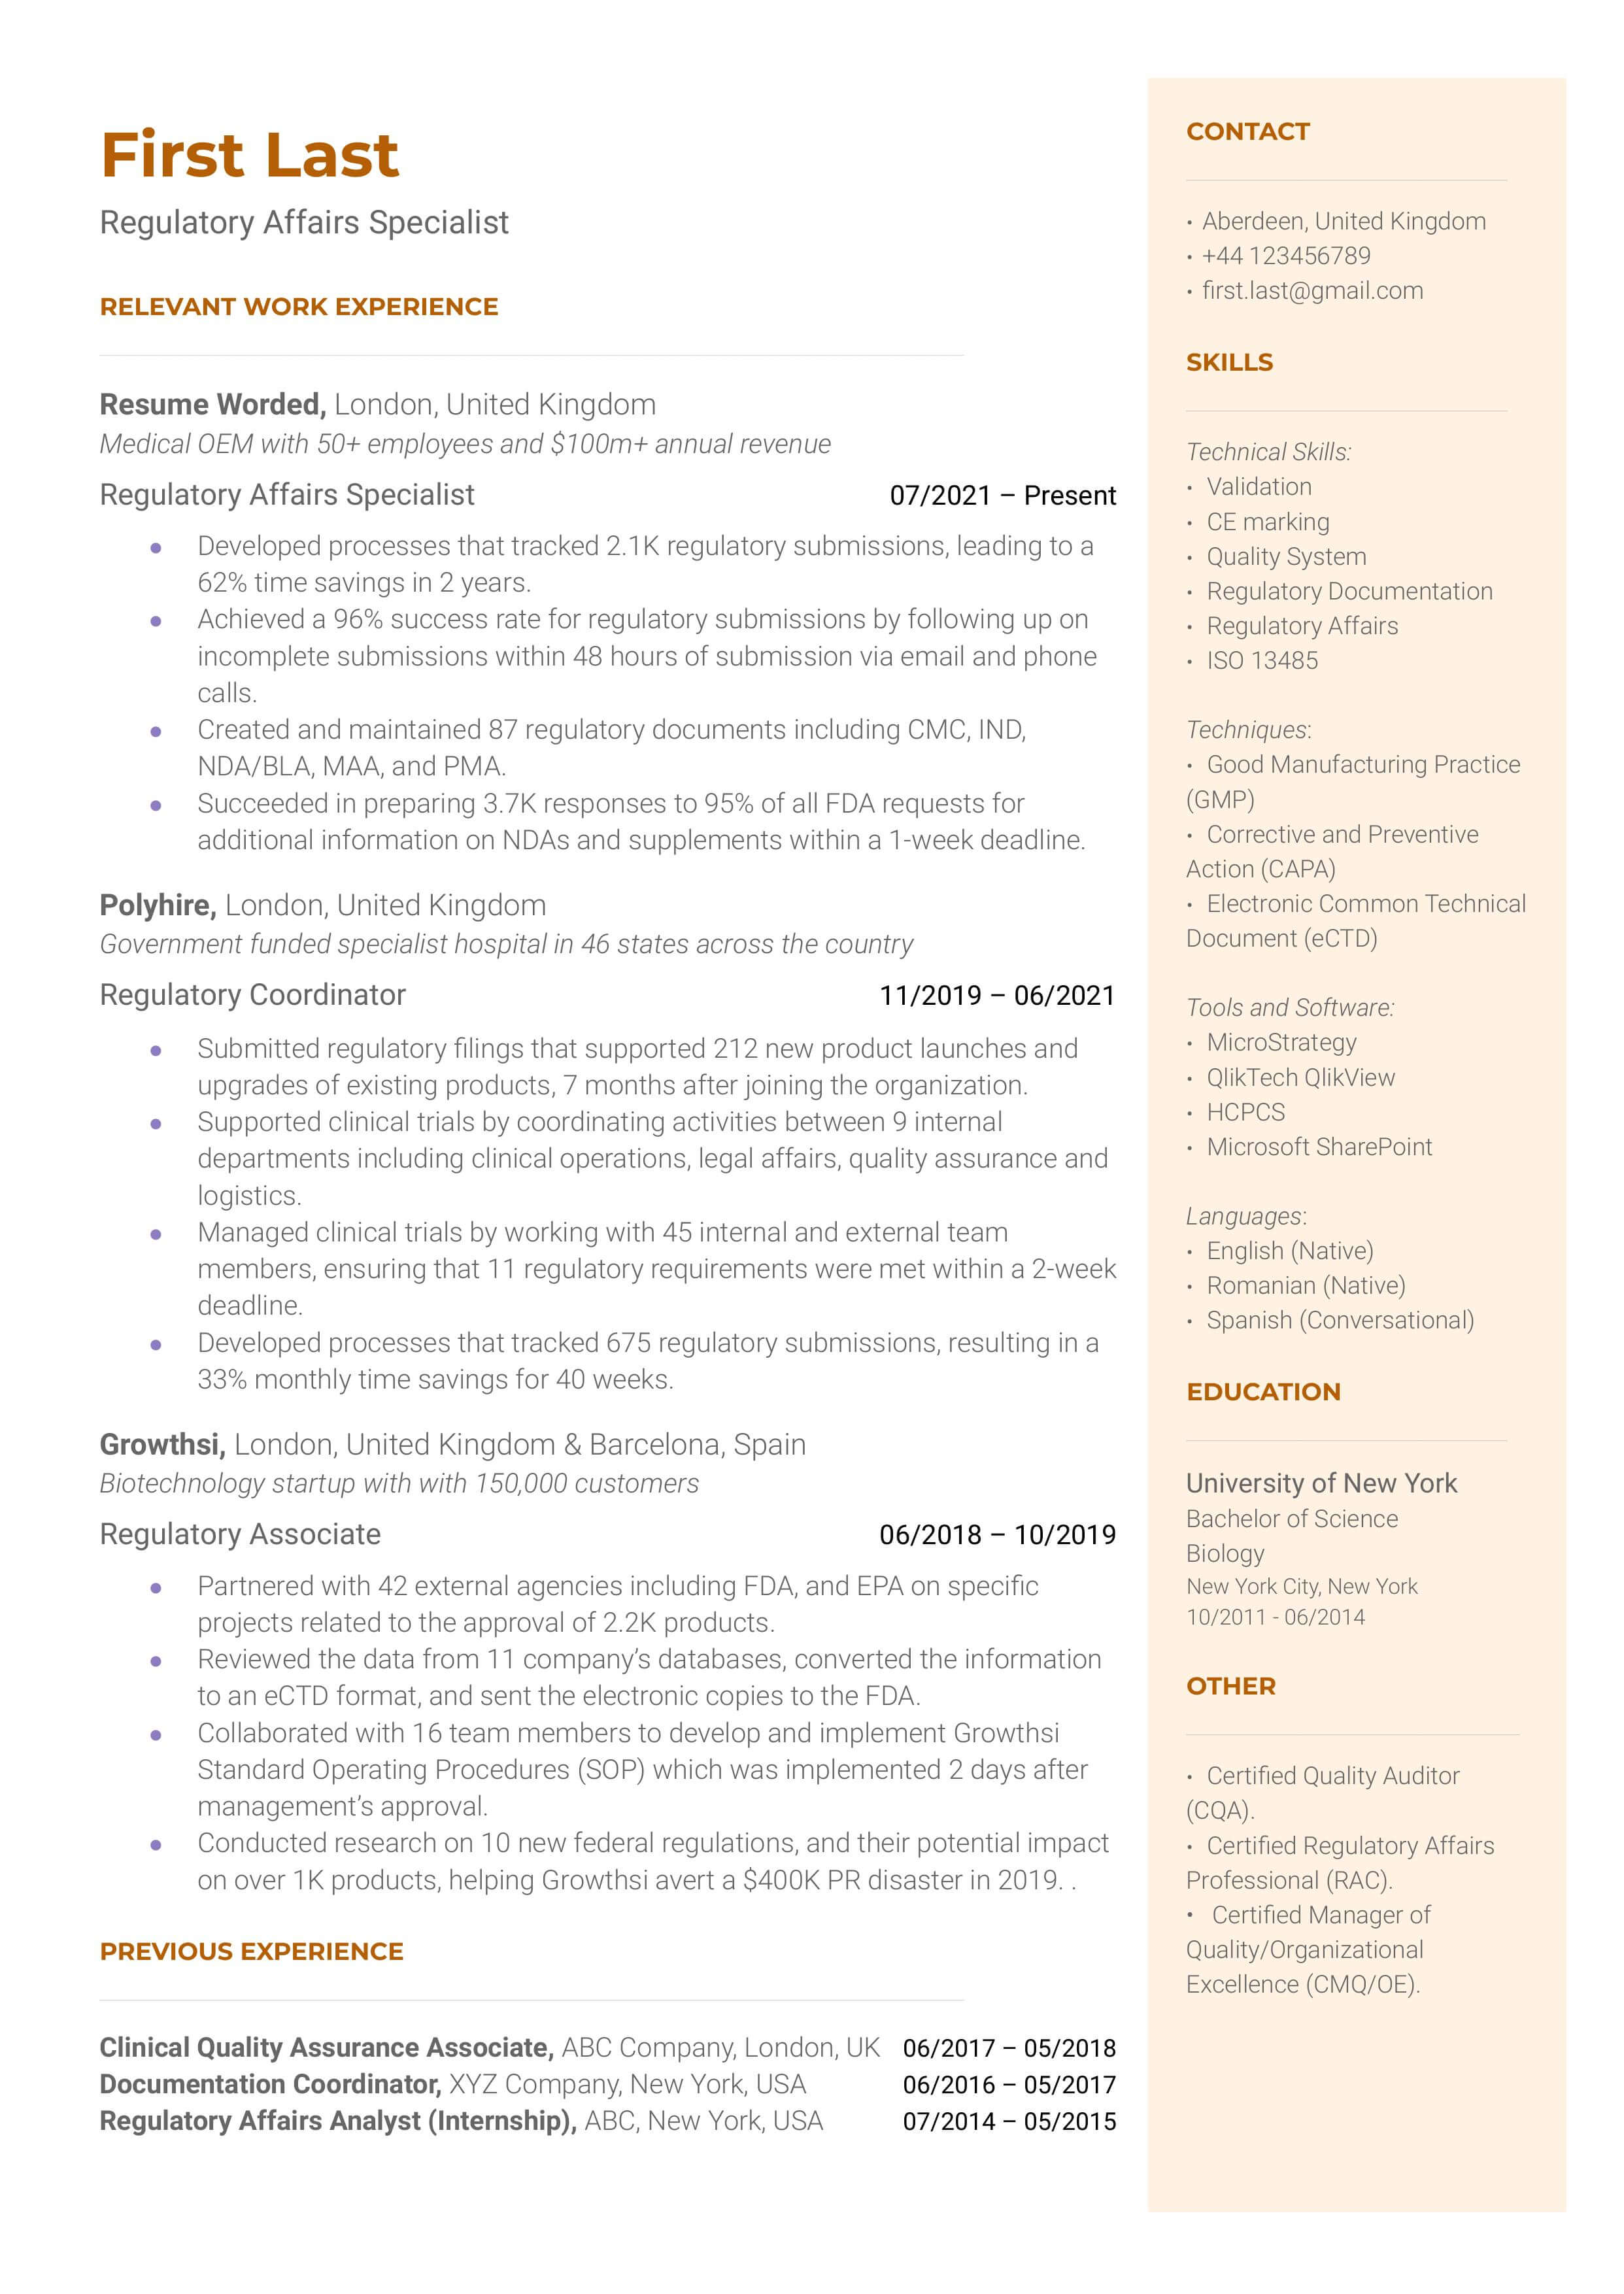 A detailed CV of a candidate applying for a Regulatory Affairs Specialist role.